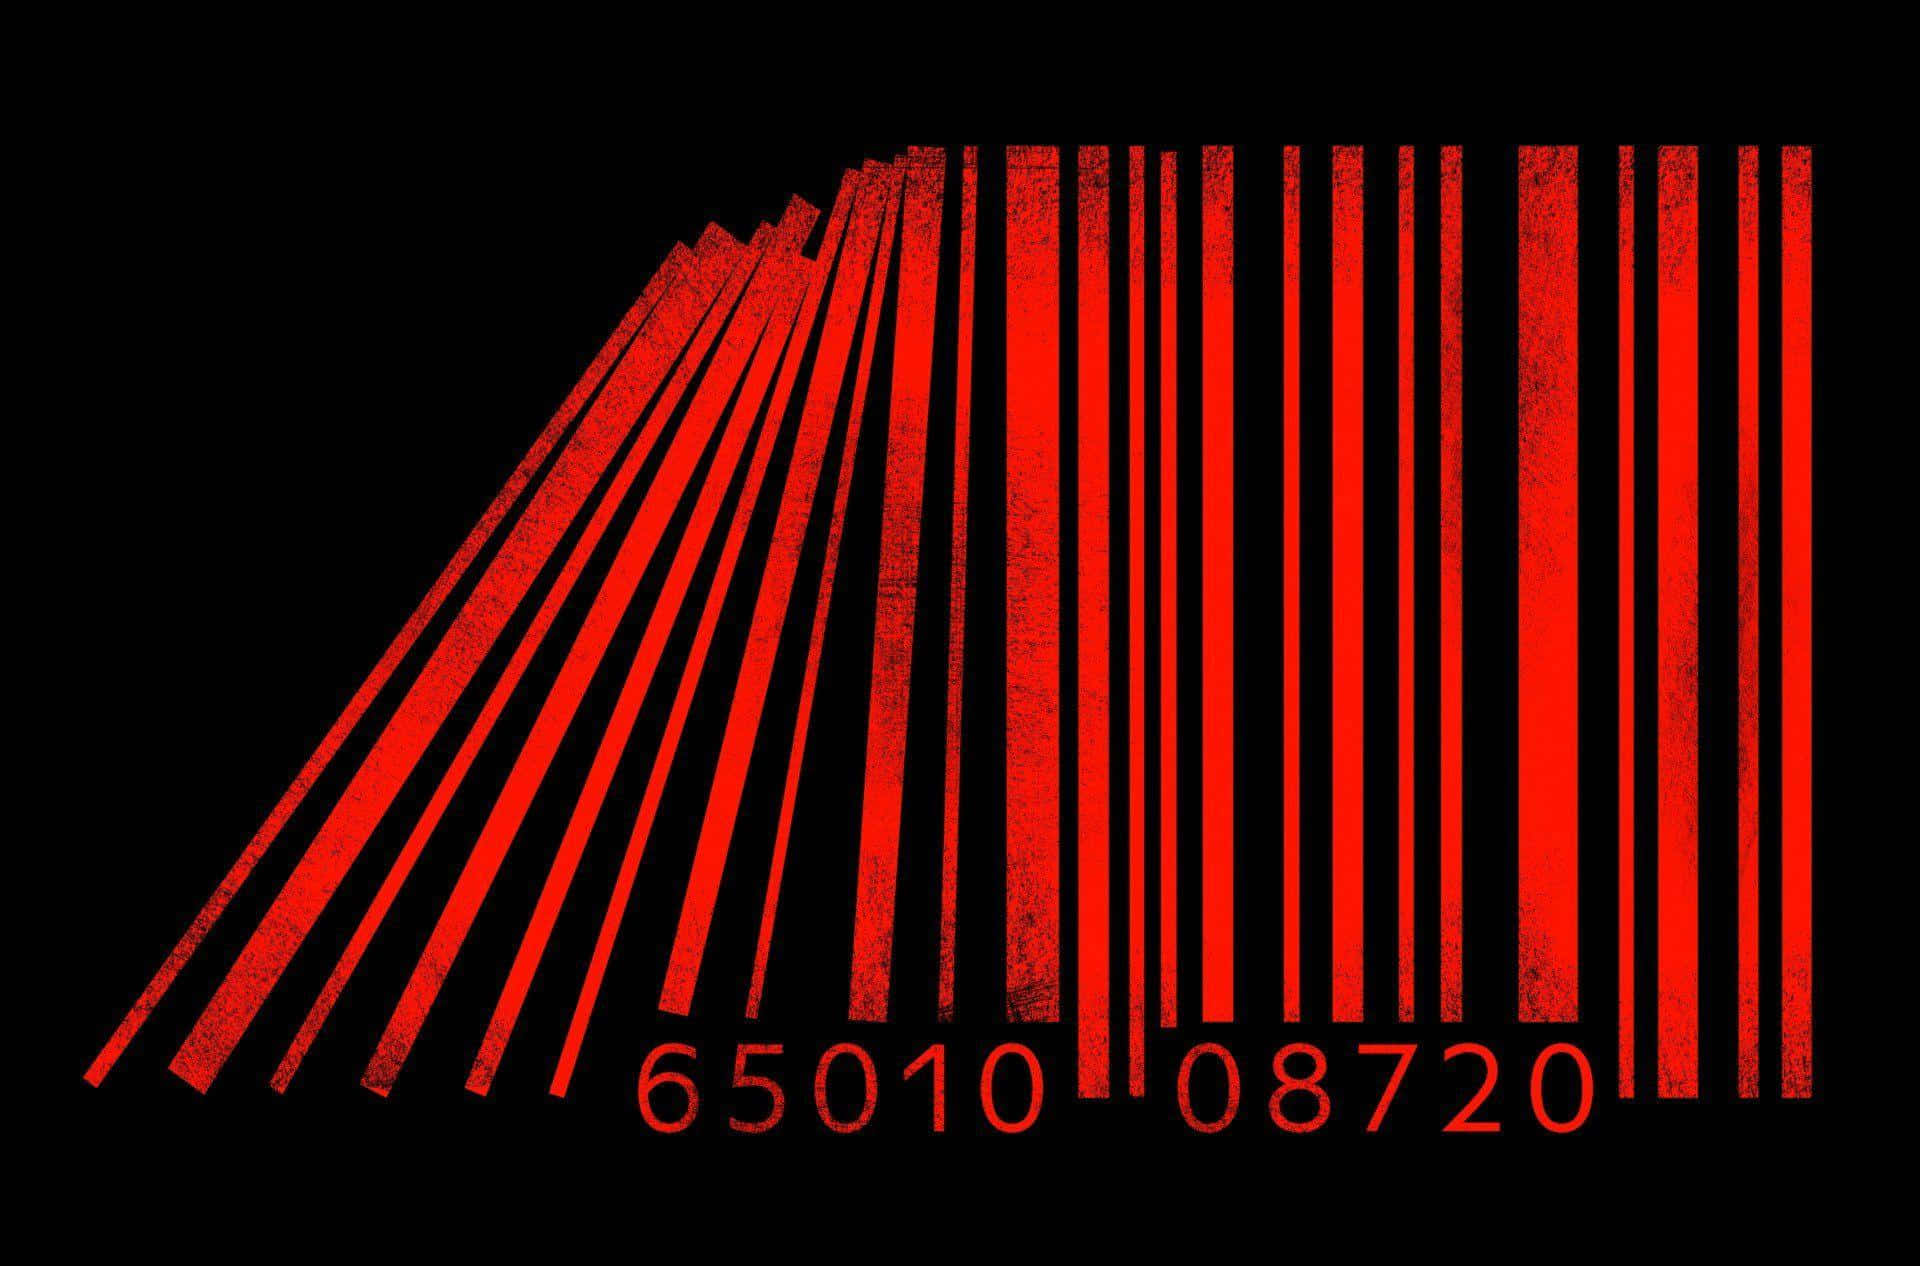 Dark Web Red Barcode Picture